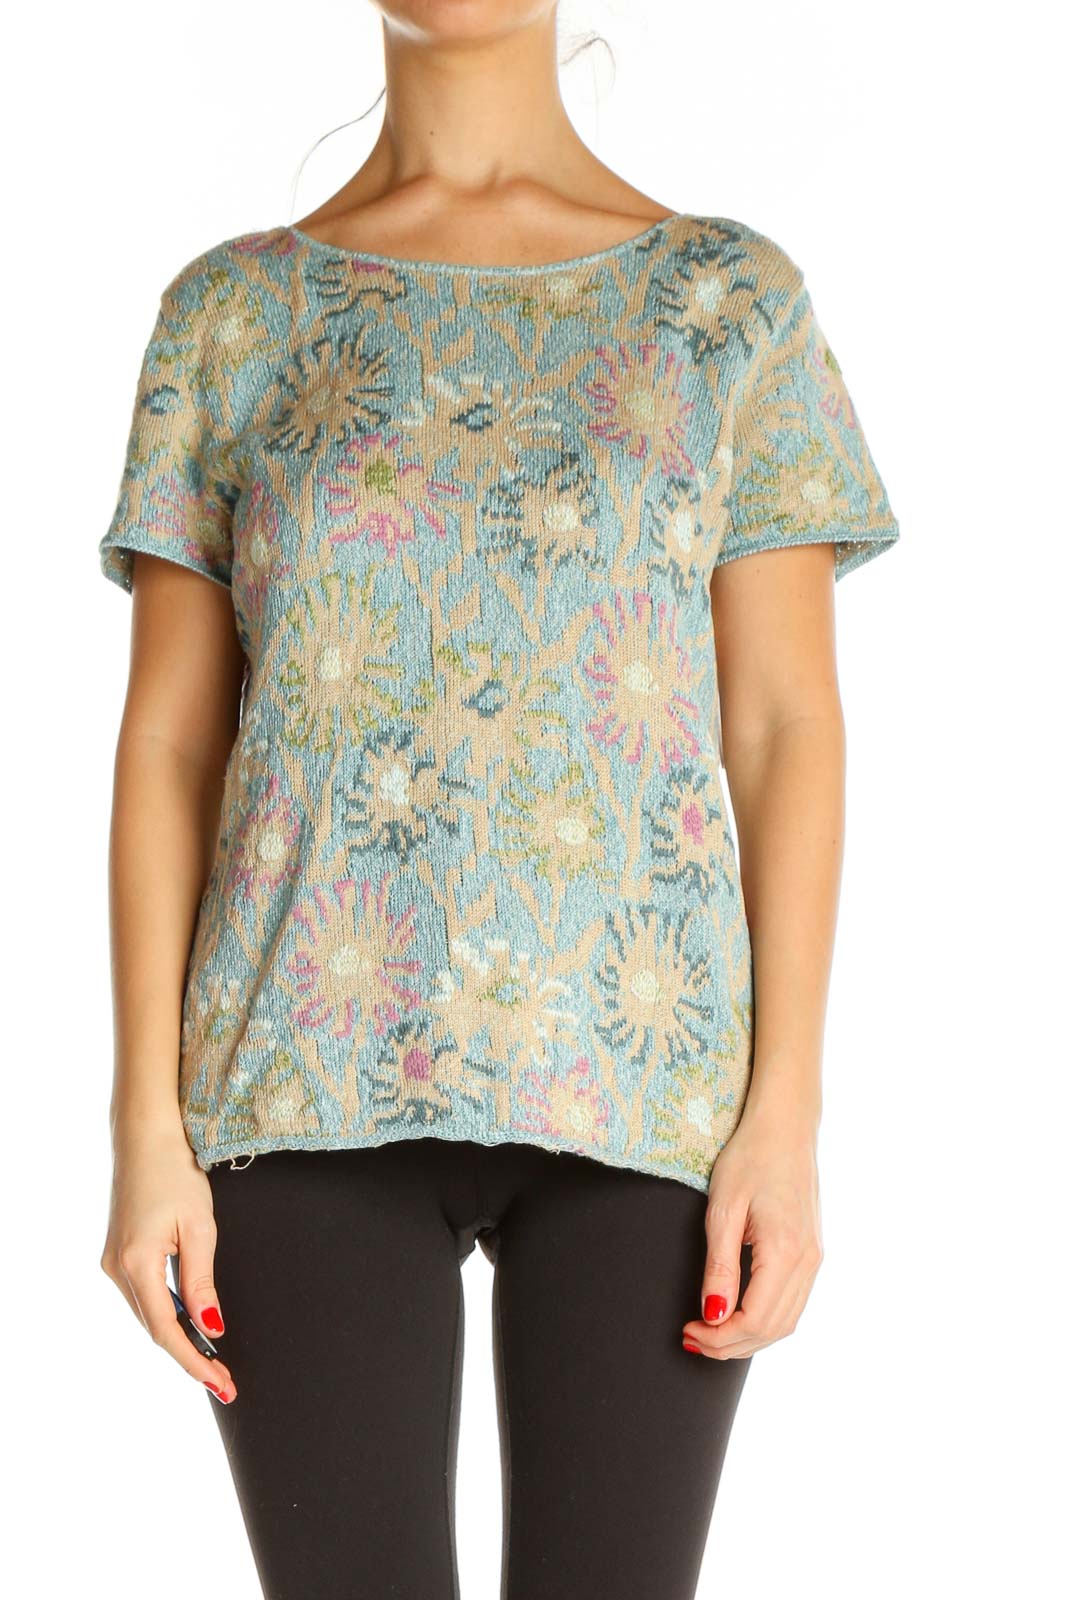 Beige Floral Print All Day Wear Blouse Front